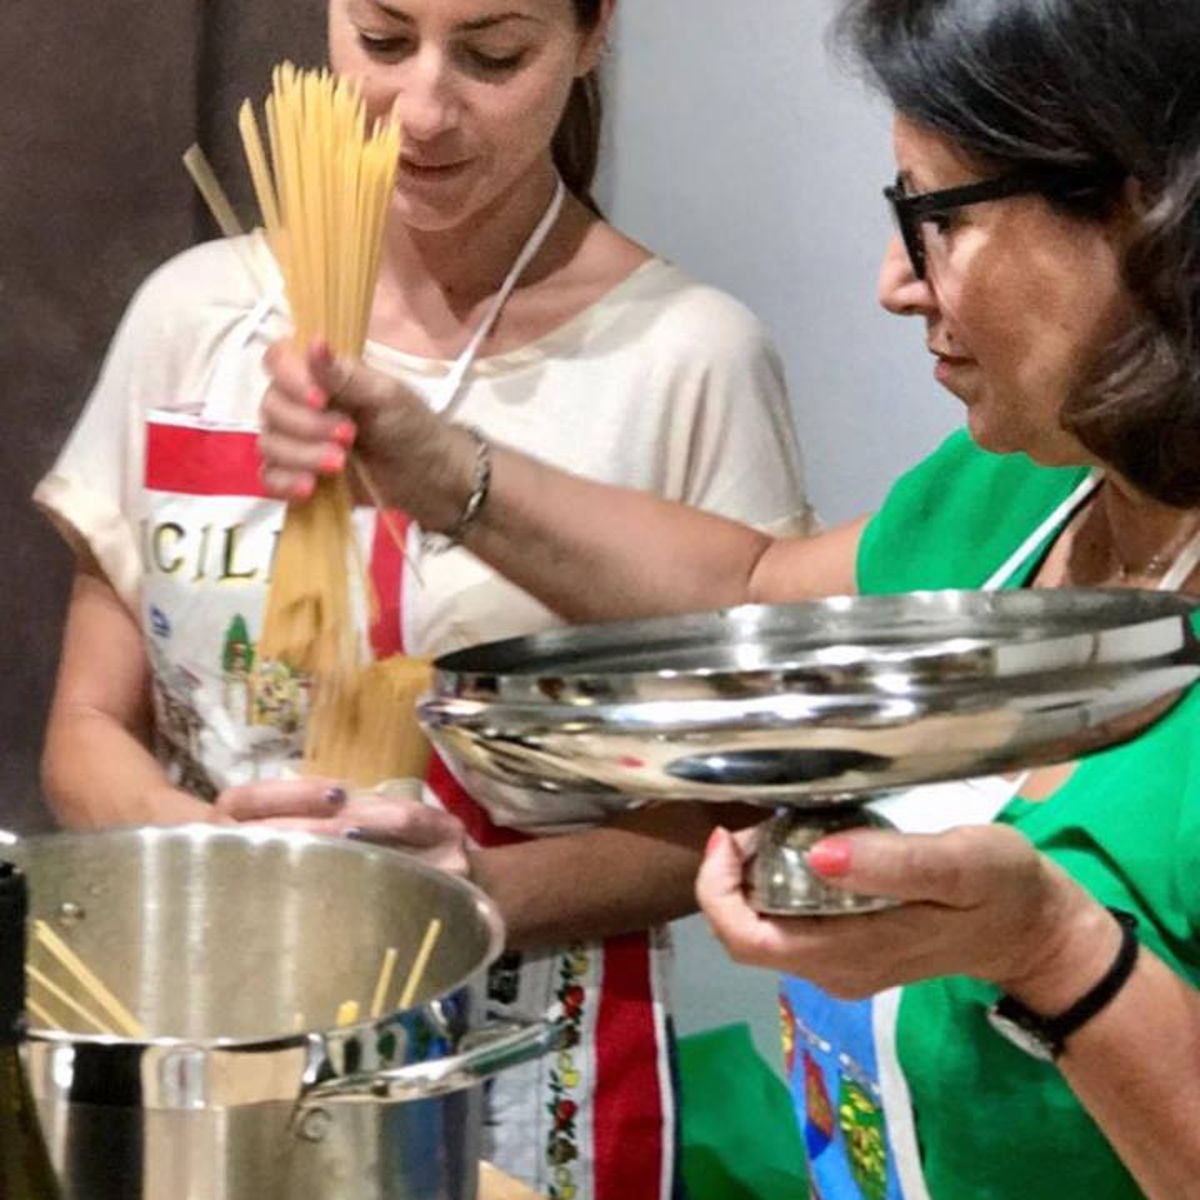 Afternoon Personalized Sicilian cooking class in Palermo